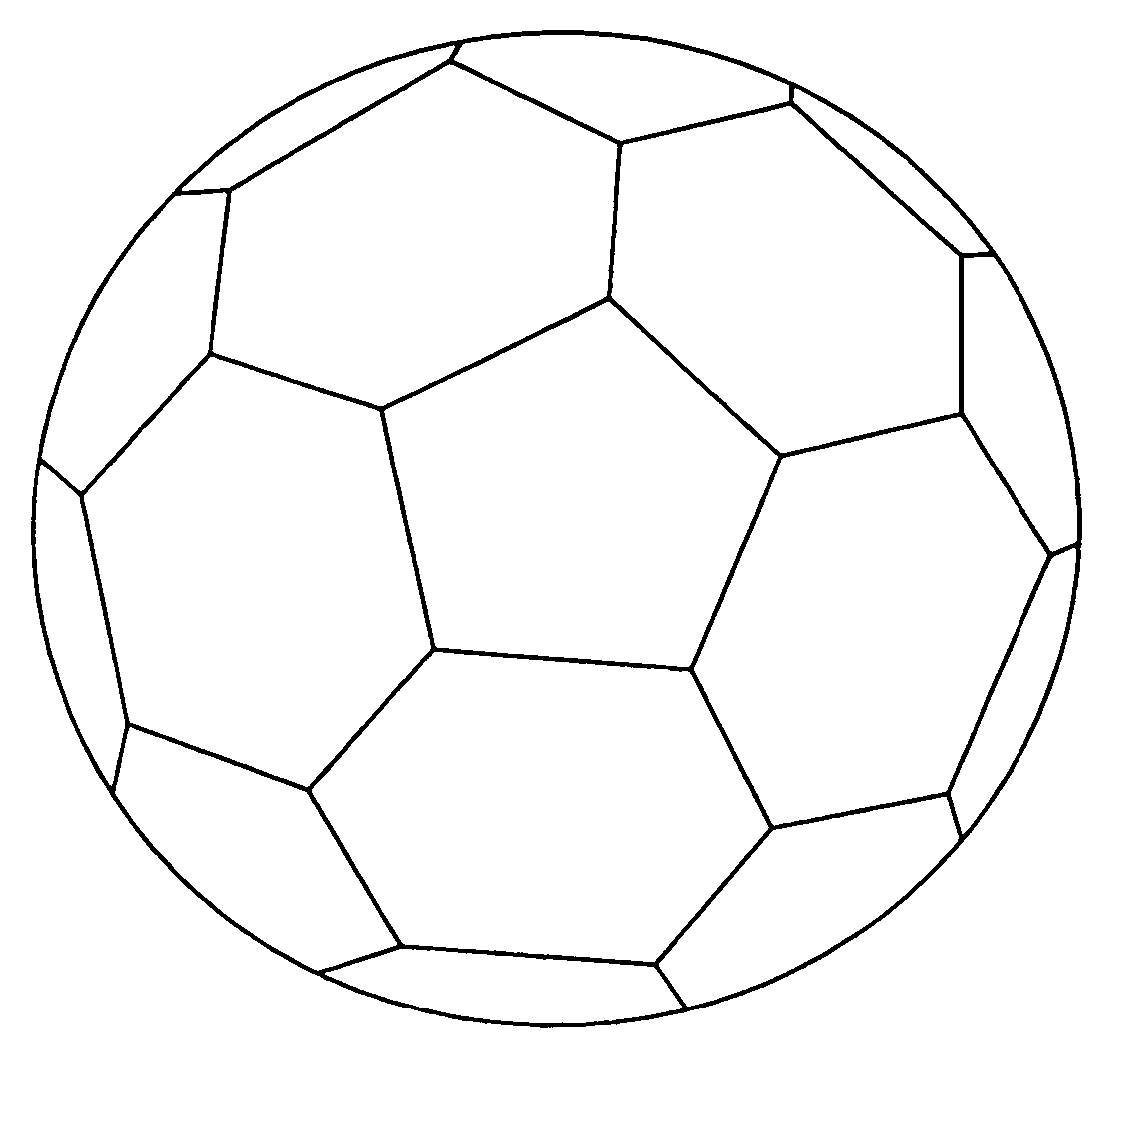 Free Printable Soccer Ball Coloring Page Cool - Coloring pages